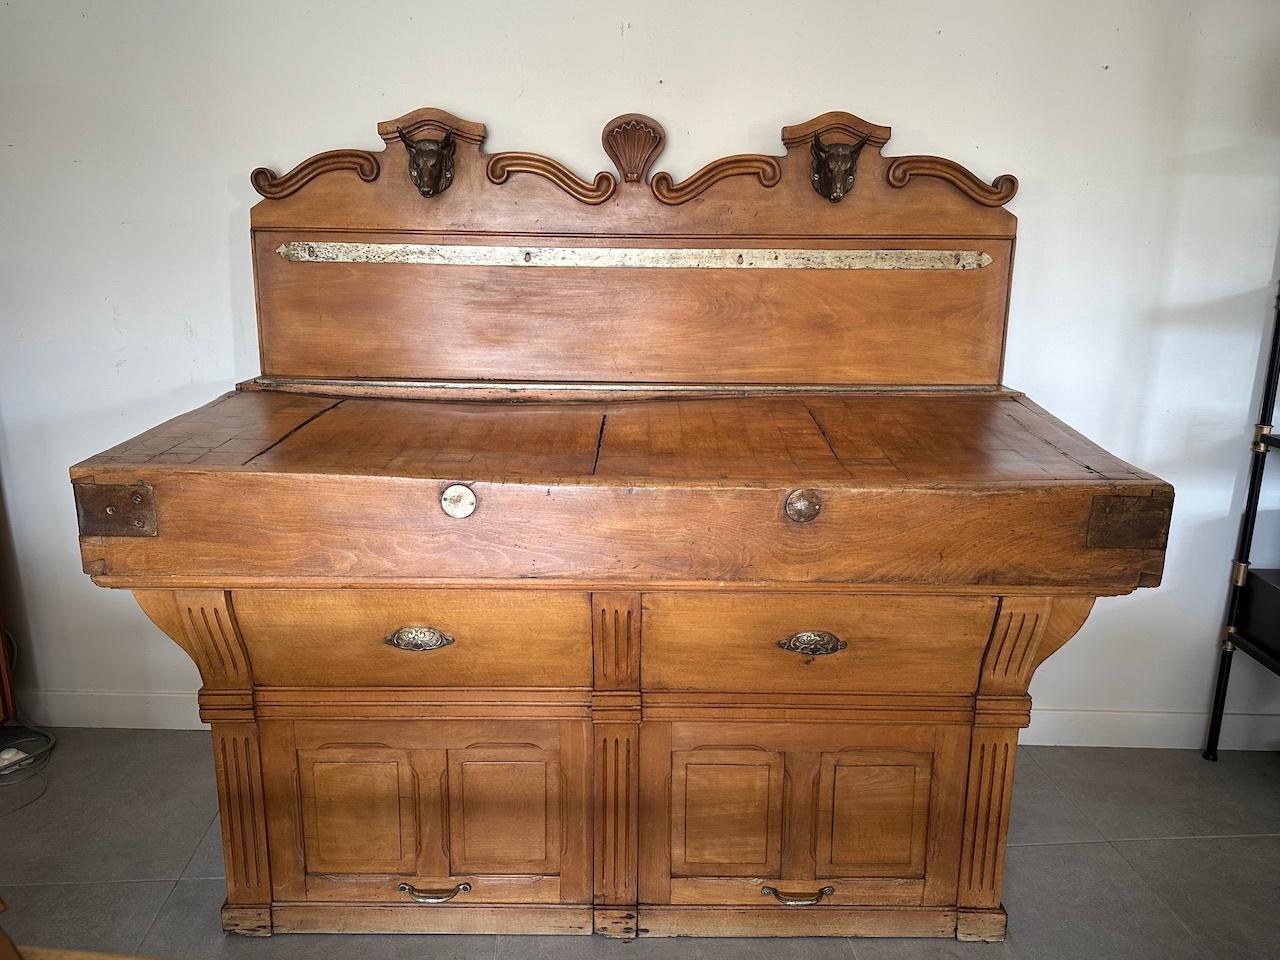 Rare piece! Magnificent butcher block dating from the beginning of the 20th century in beech and standing wooden top allowing it to be scraped both vertically and horizontally (to remove fat).
Two cast iron ox heads adorn the upper part. A metal